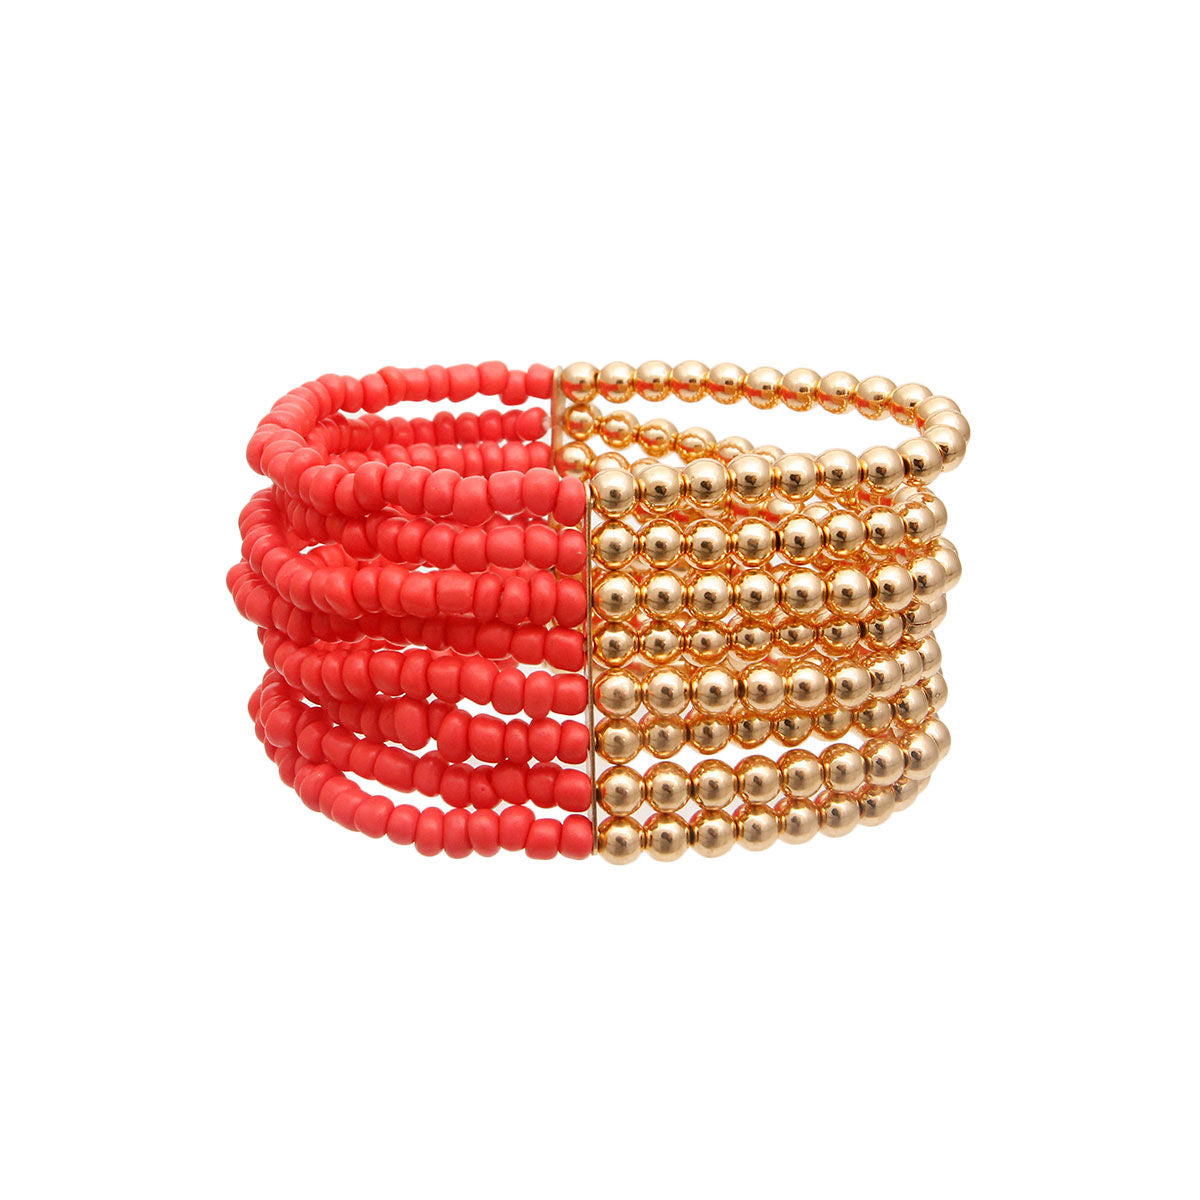 Coral and Gold Seed Bead Bracelet